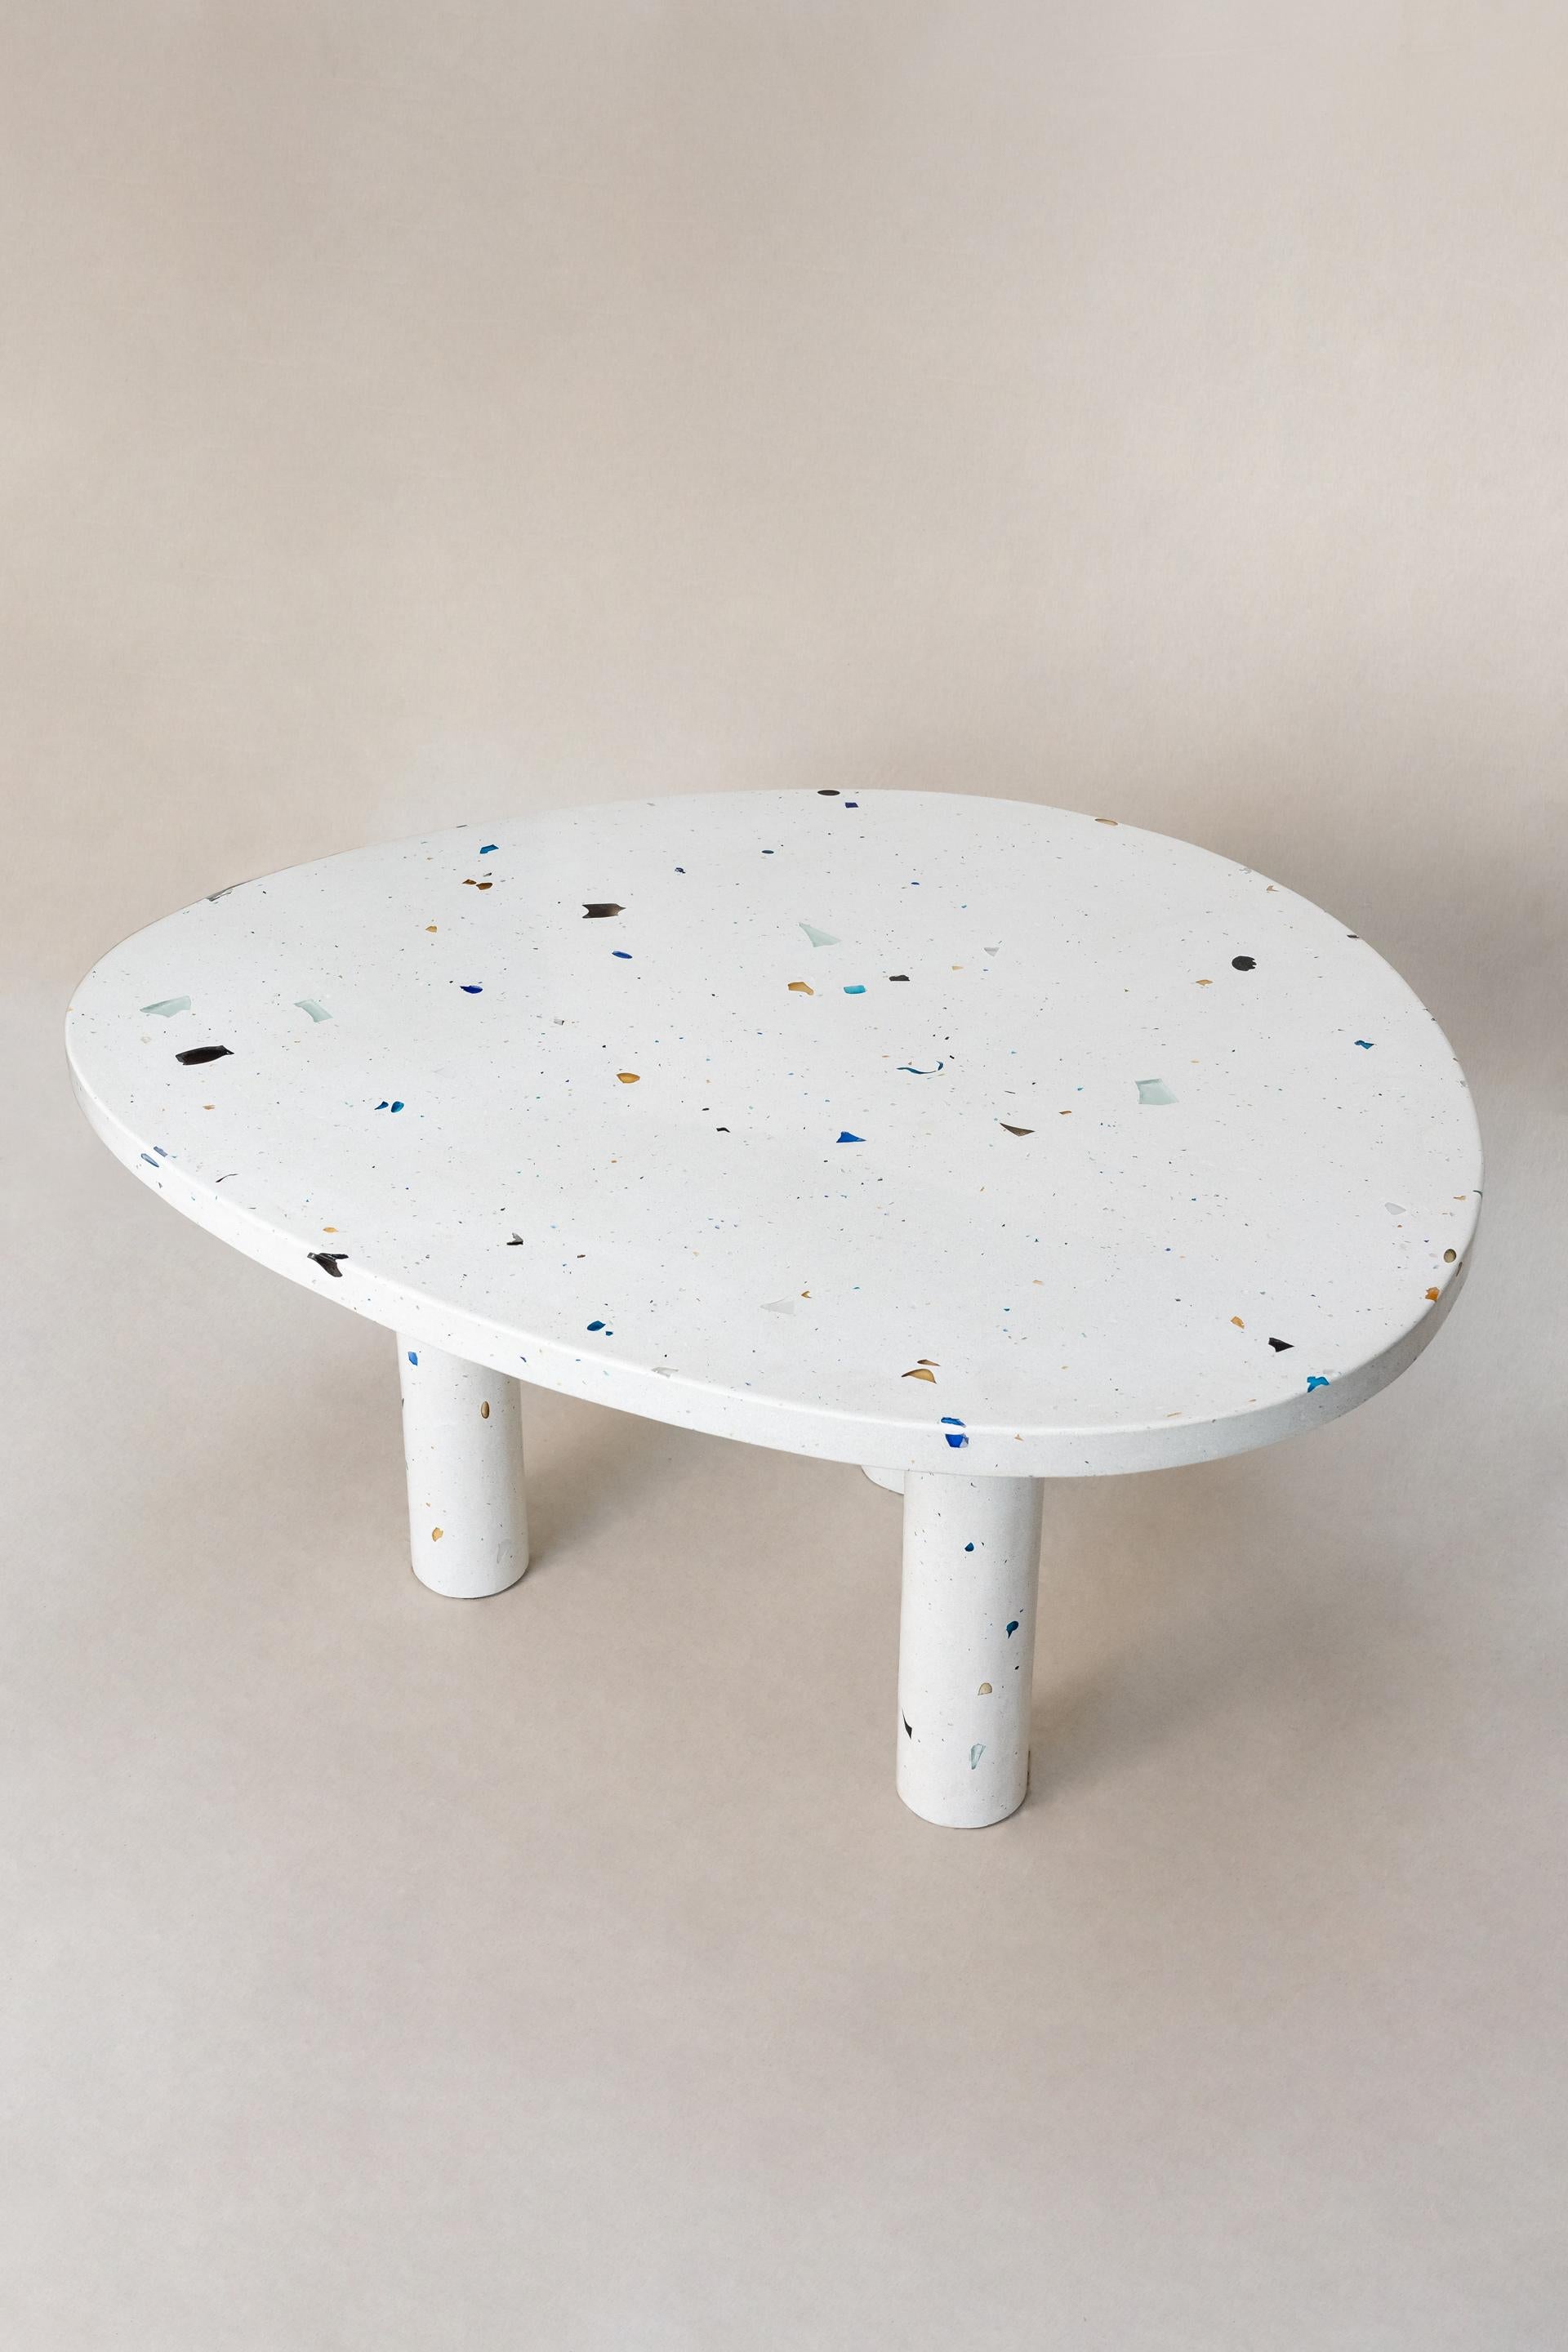 The Mono Dining Table (8 seats) takes part of the MONOMORFO collection. It has an amorphous top with 2 possible variations of shape. The terrazzo composition is made of leftover glass crystals from a glass crystal factory in Minas Gerais, Brazil.